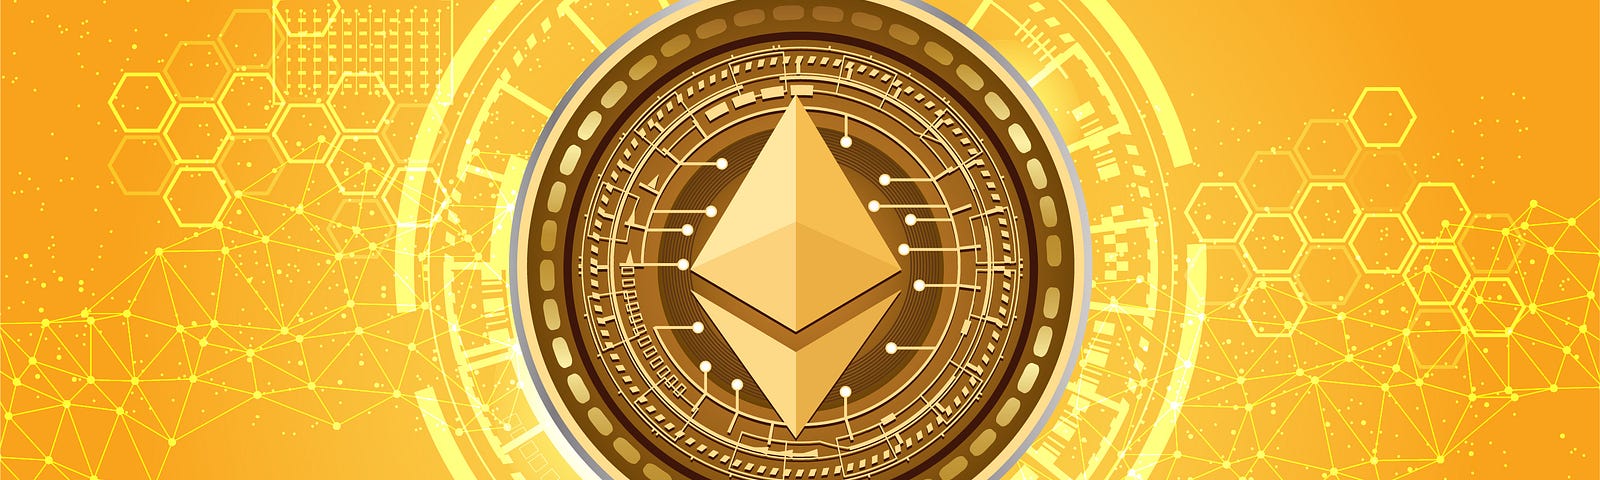 Ethereum Forecast: The future of Cryptocurrency?